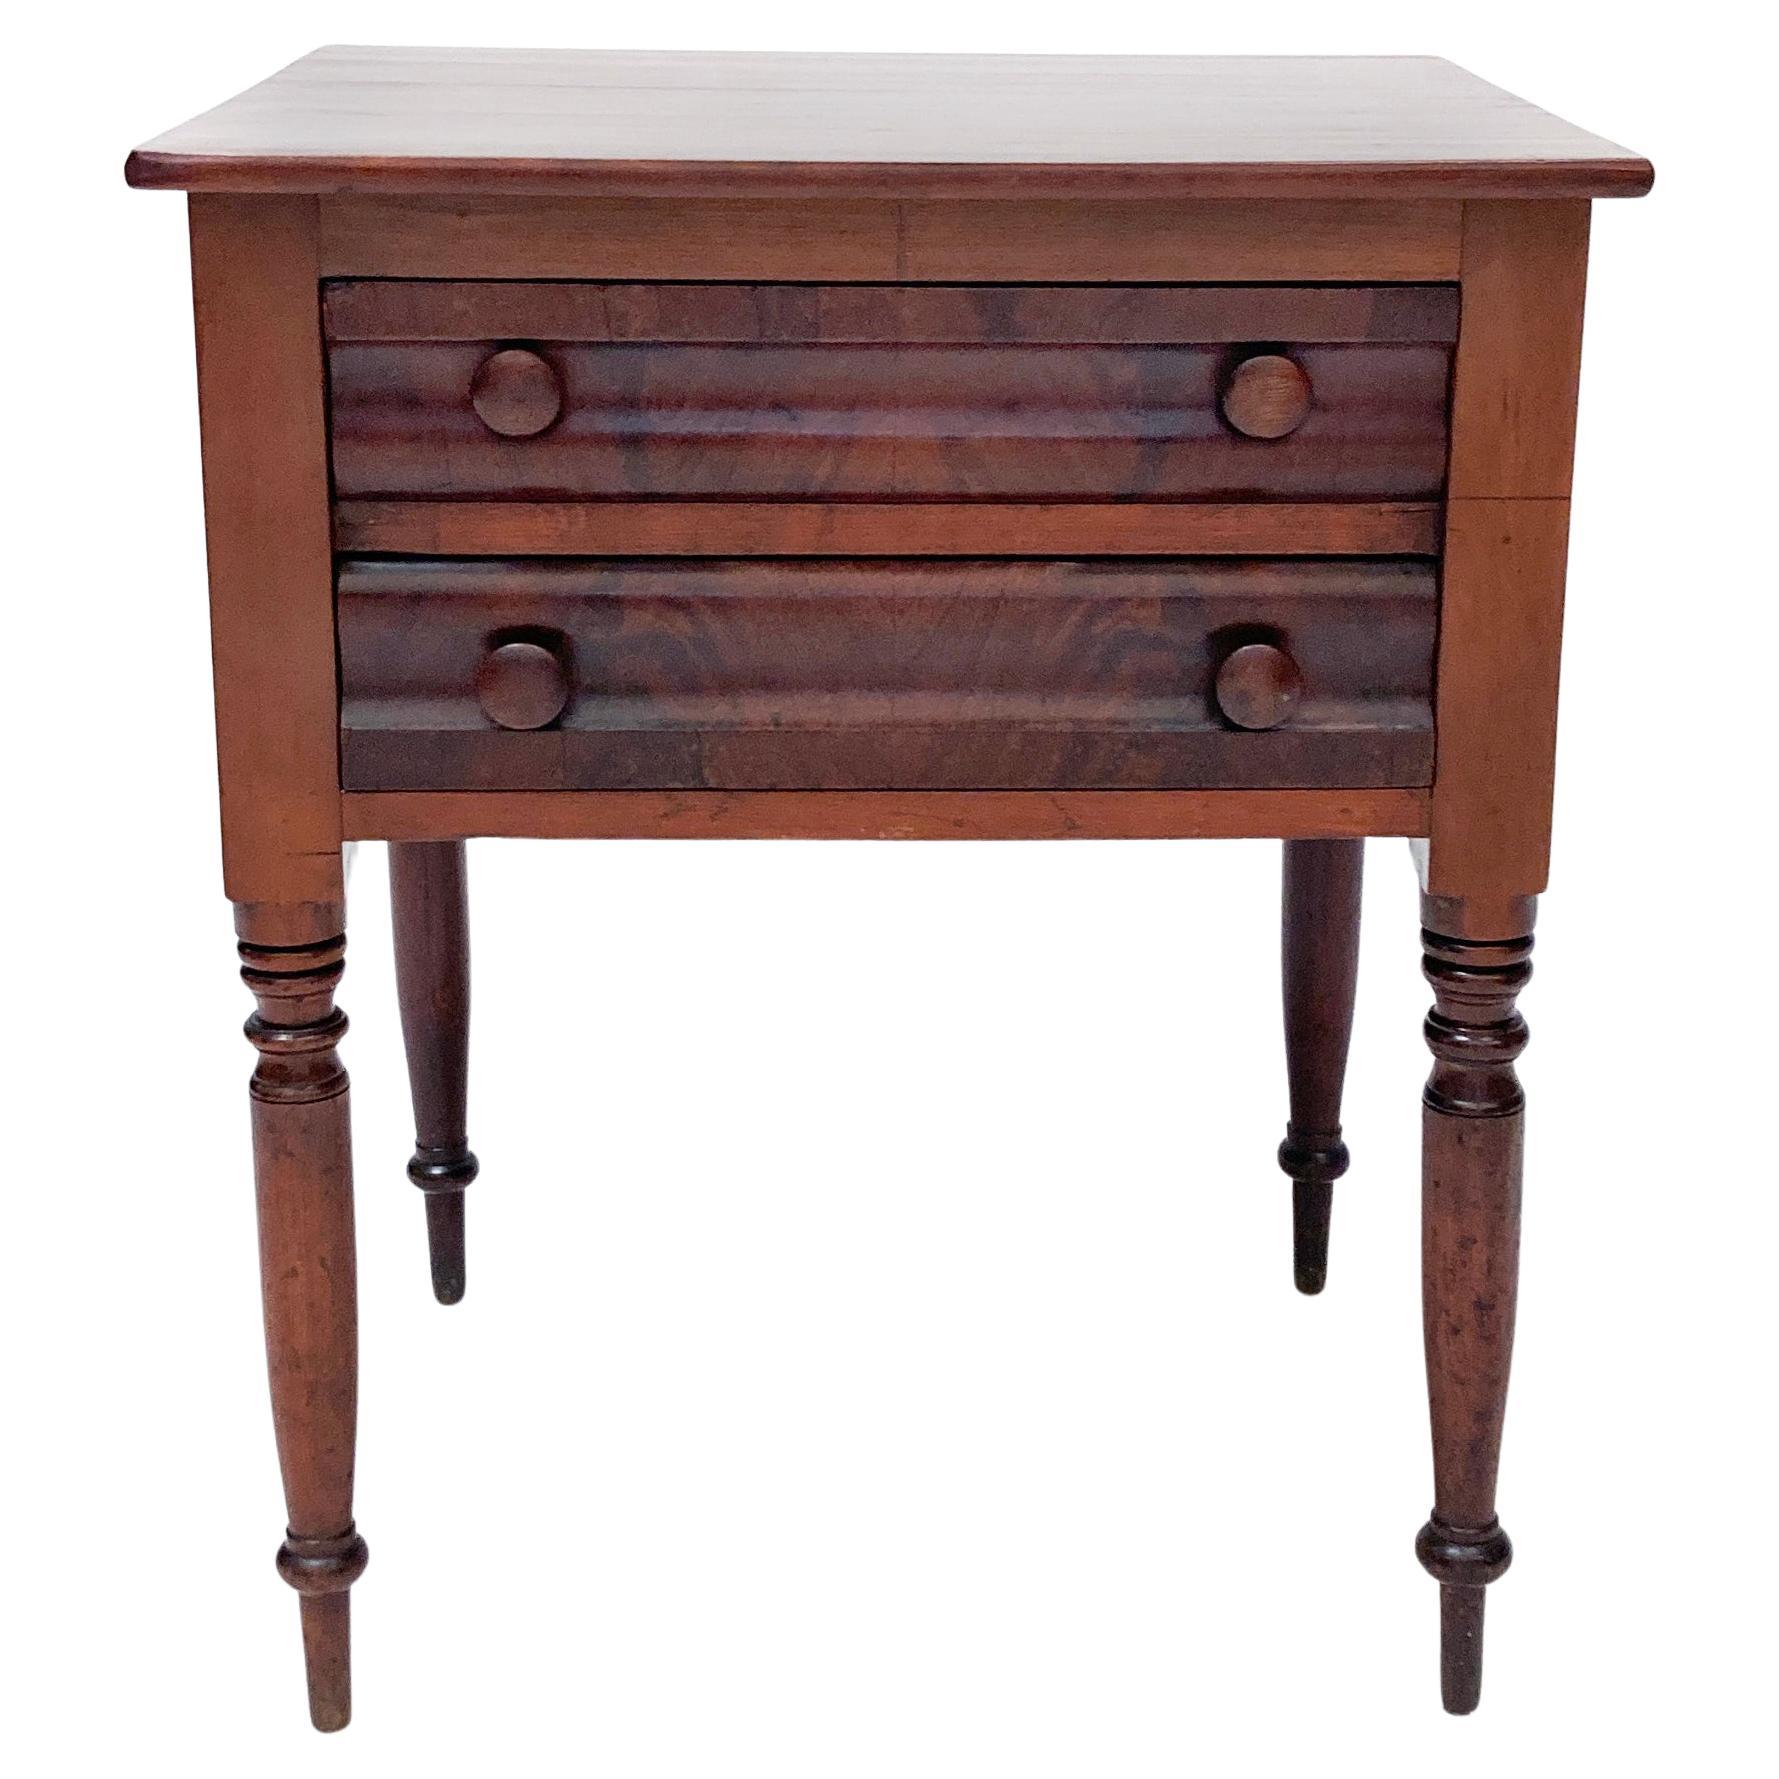 1800's American Federal Period 2 Drawer Side Table For Sale